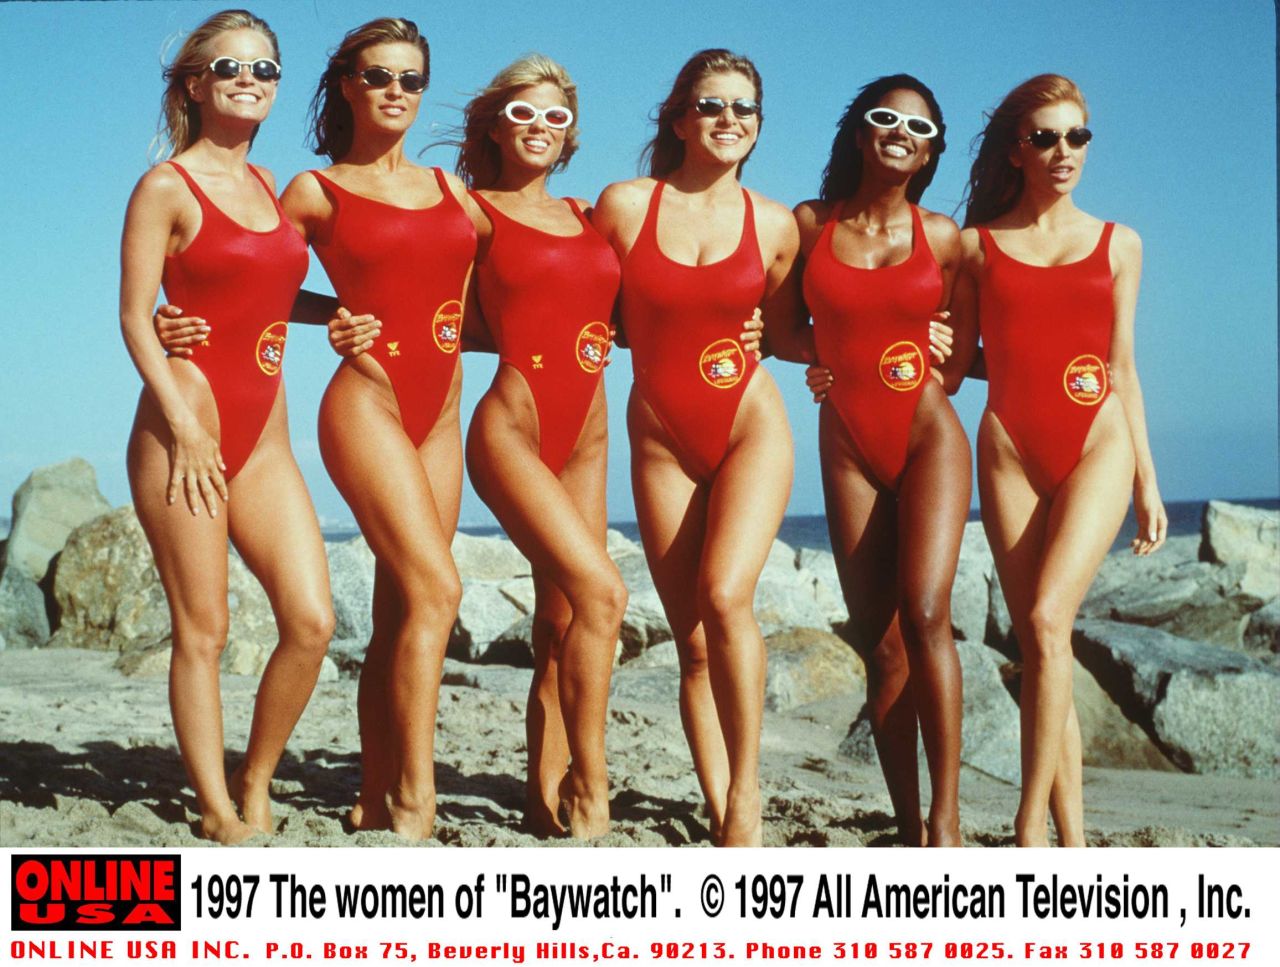 The leggy lifeguards on the television show "Baywatch" made these tank-style one-piece bathing suits a staple of 1990s television.